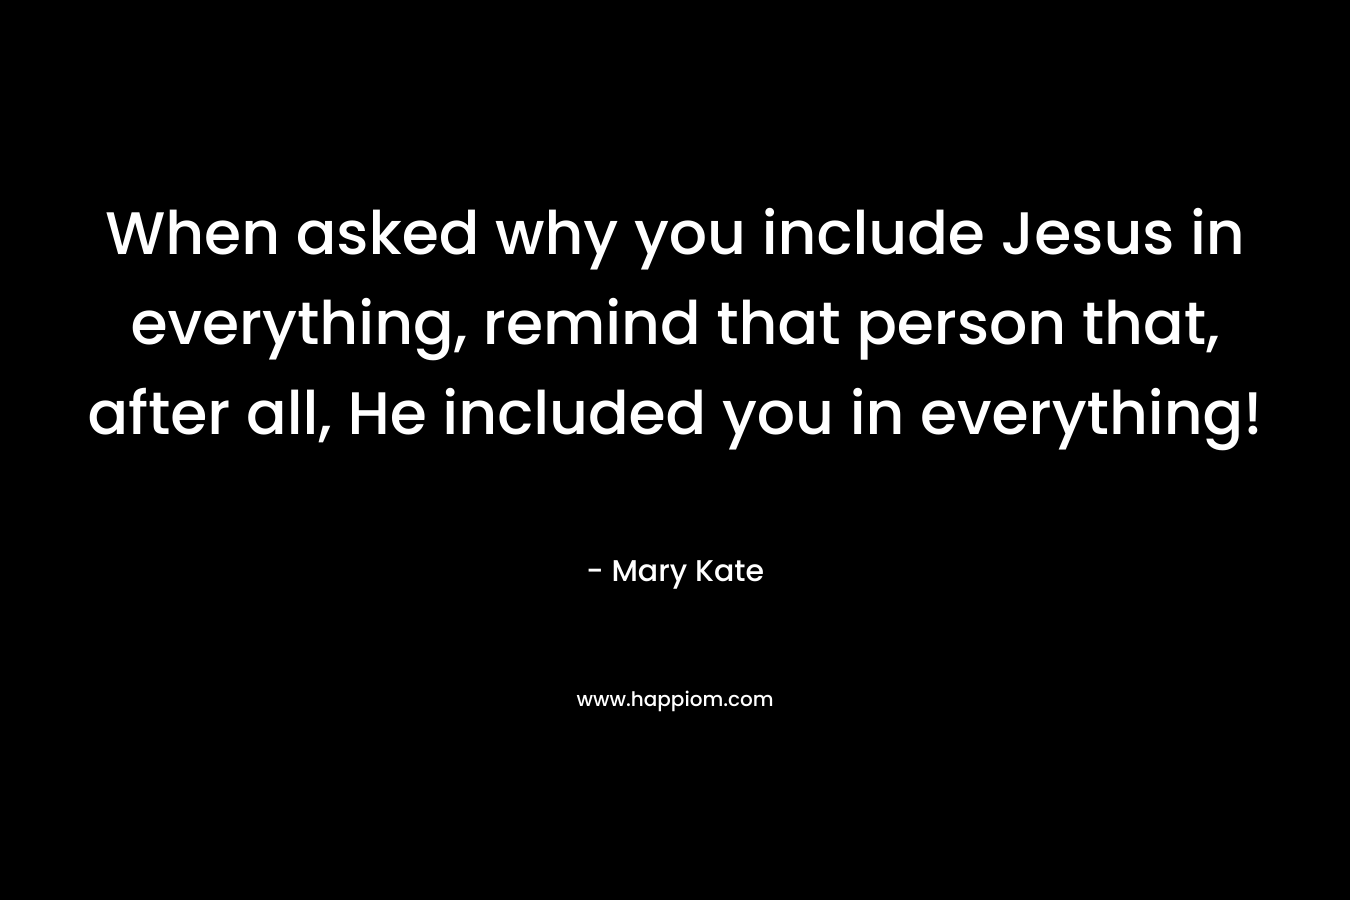 When asked why you include Jesus in everything, remind that person that, after all, He included you in everything! – Mary Kate